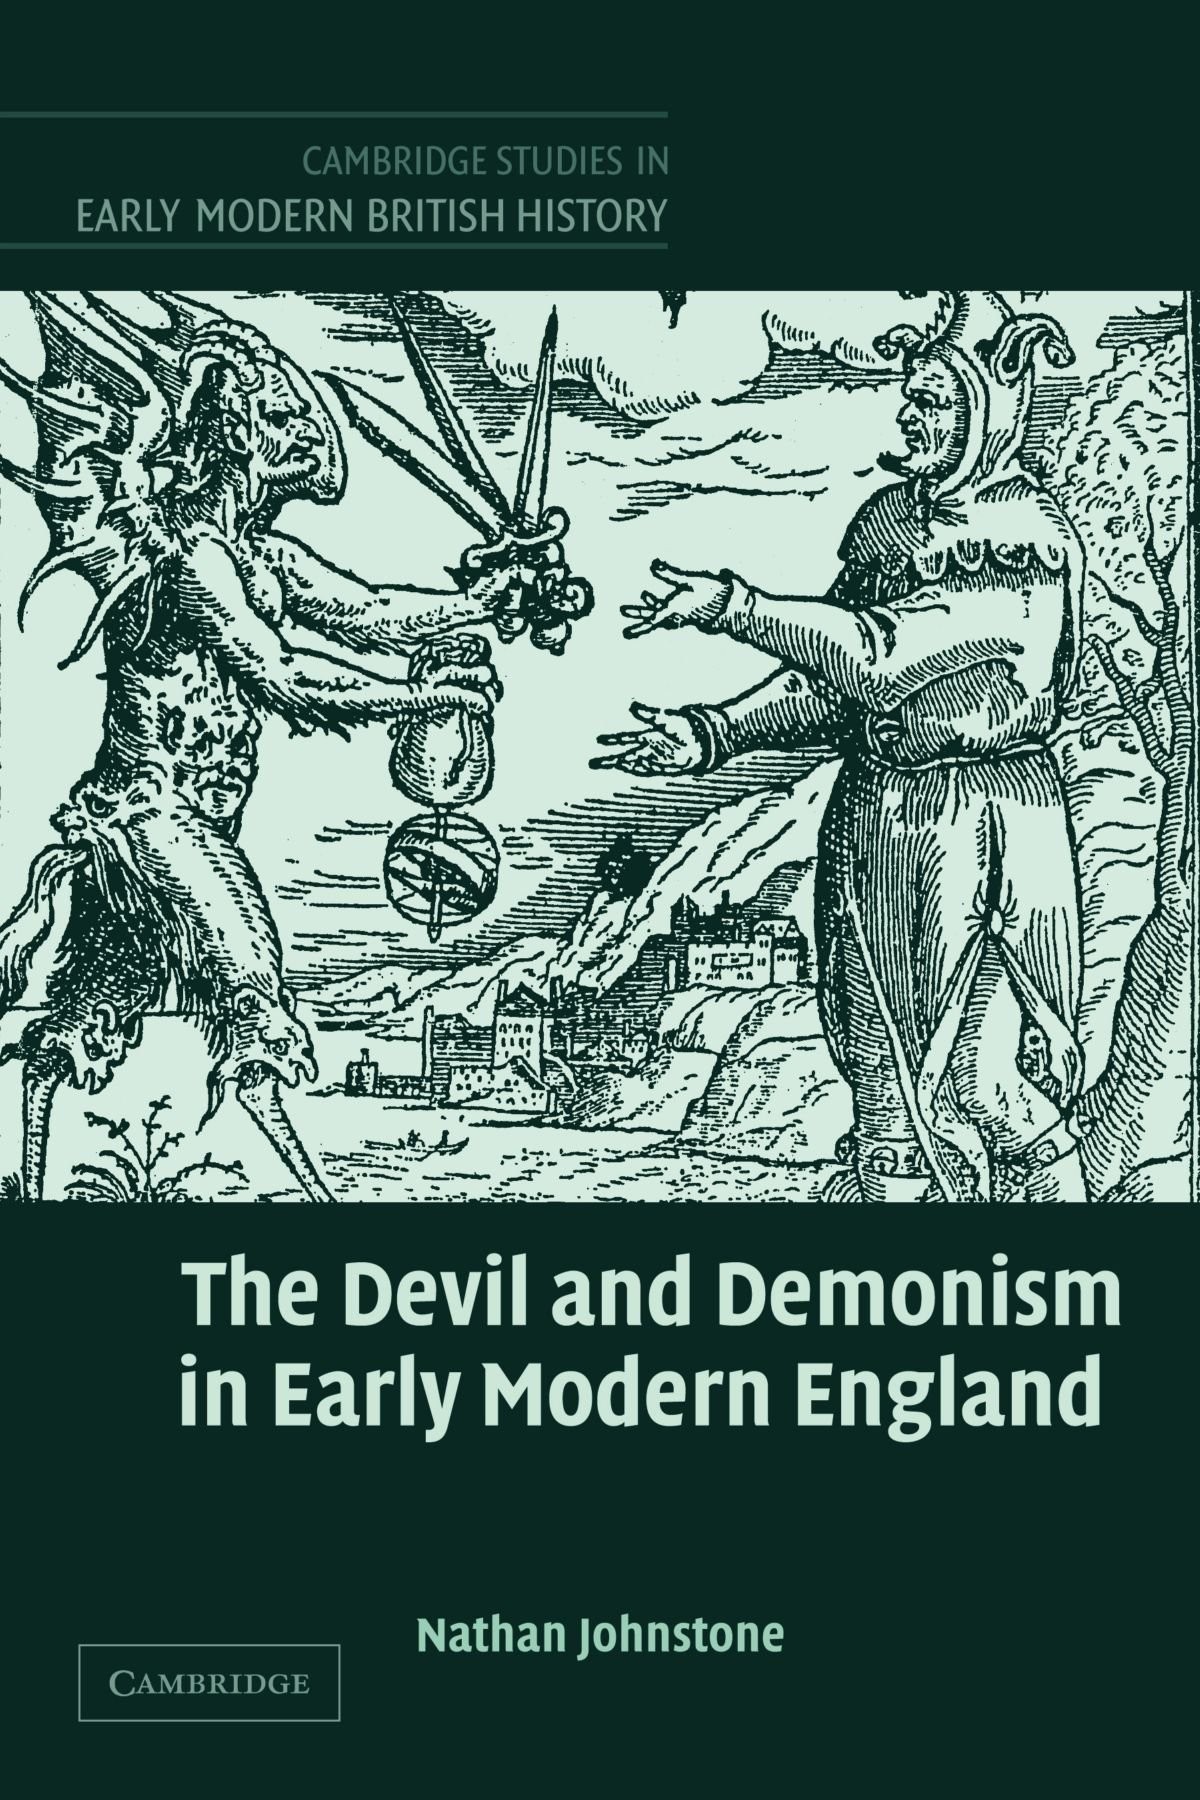 The Devil and Demonism in Early Modern England